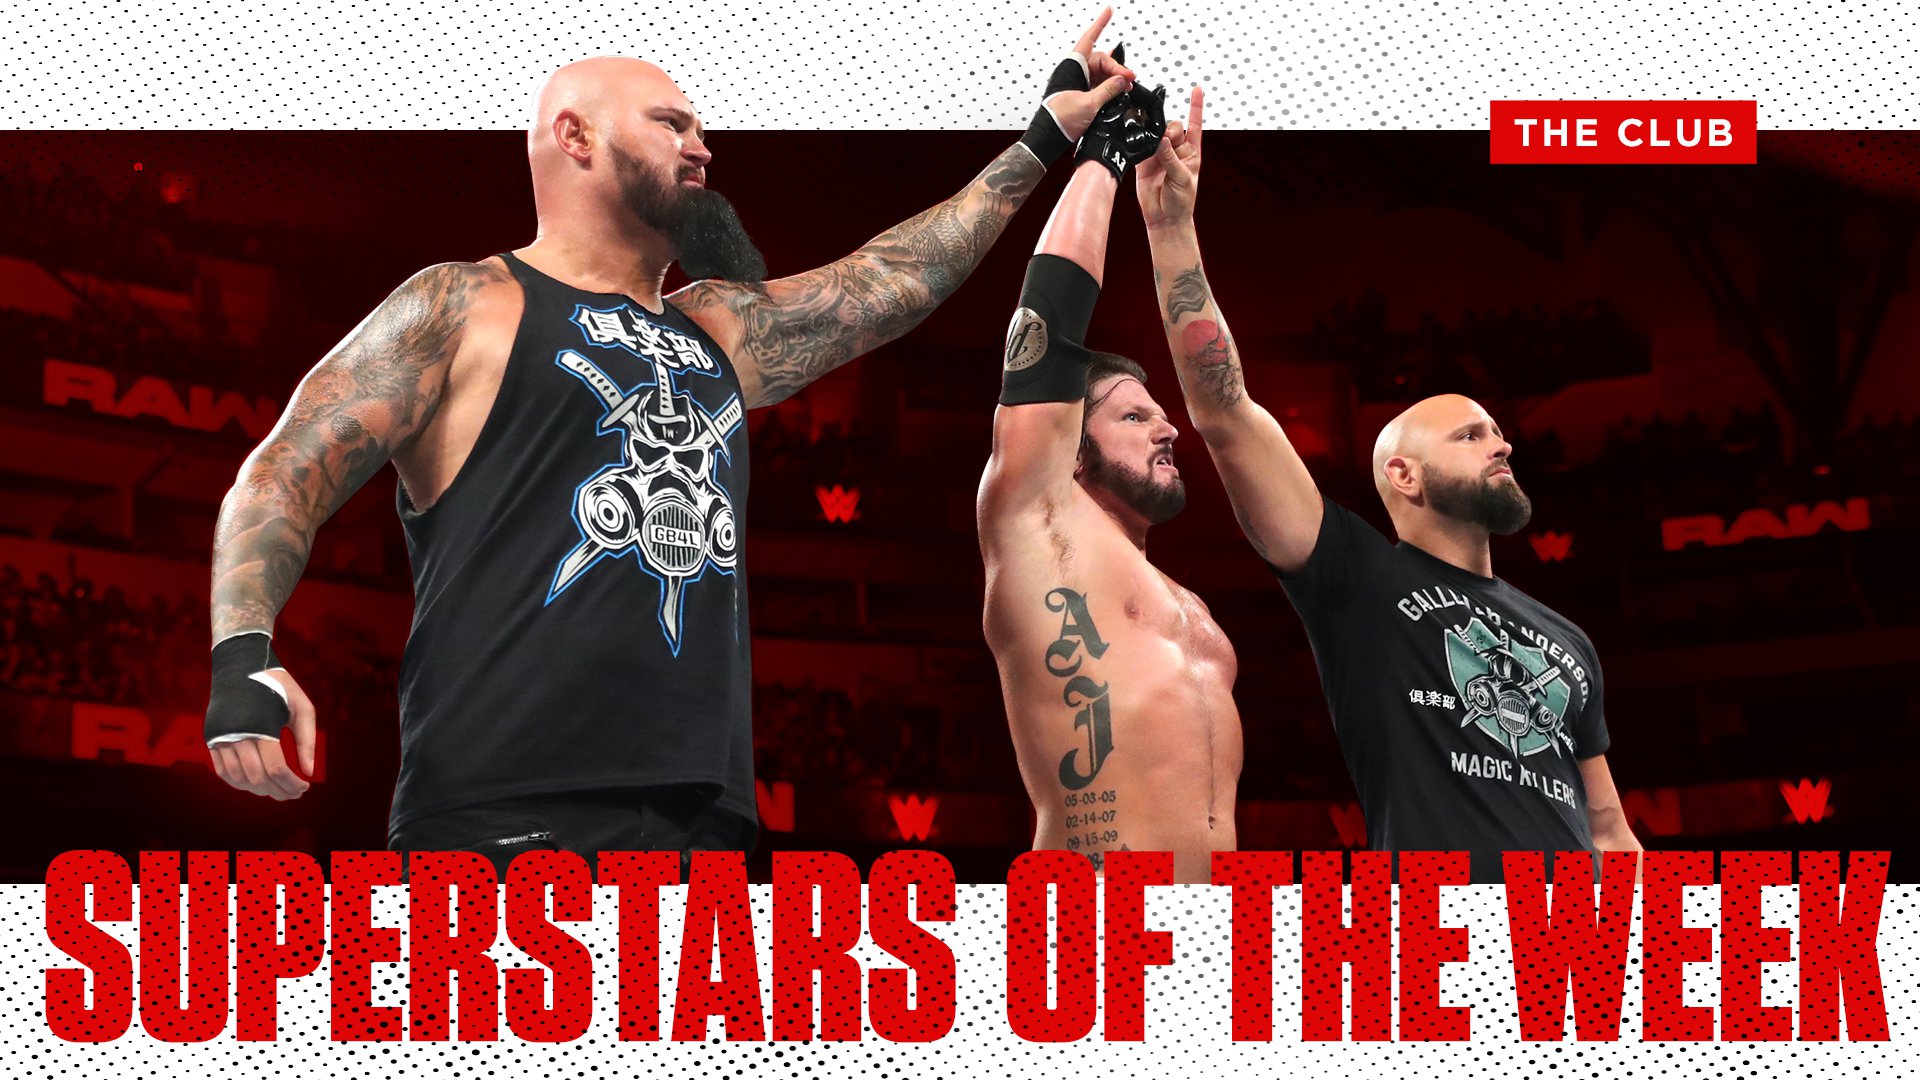 The Club named Superstars of the Week